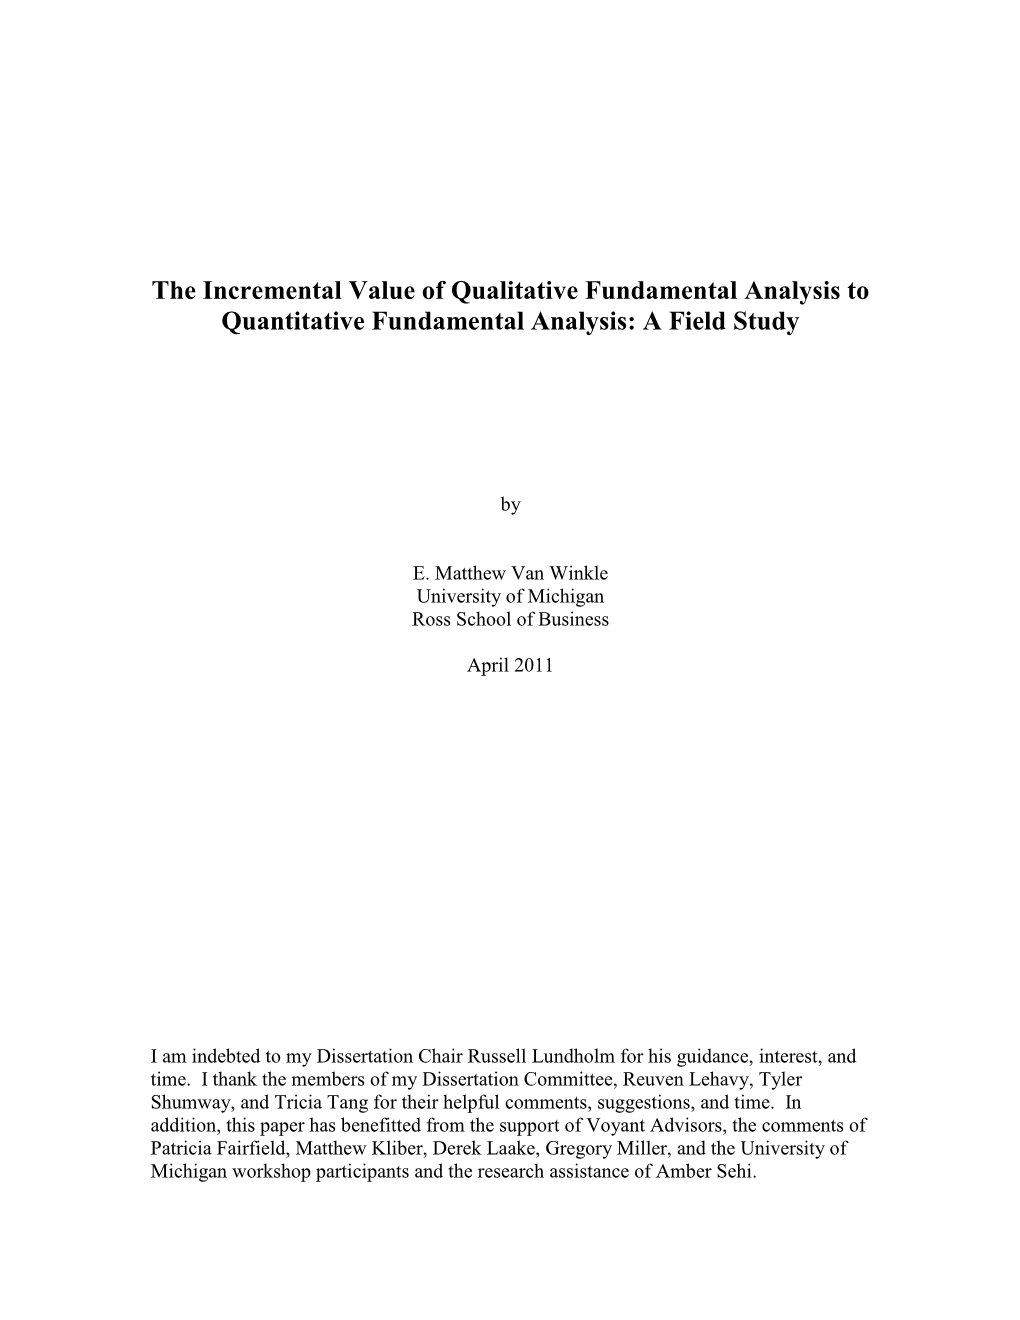 The Incremental Value of Qualitative Fundamental Analysis to Quantitative Fundamental Analysis: a Field Study